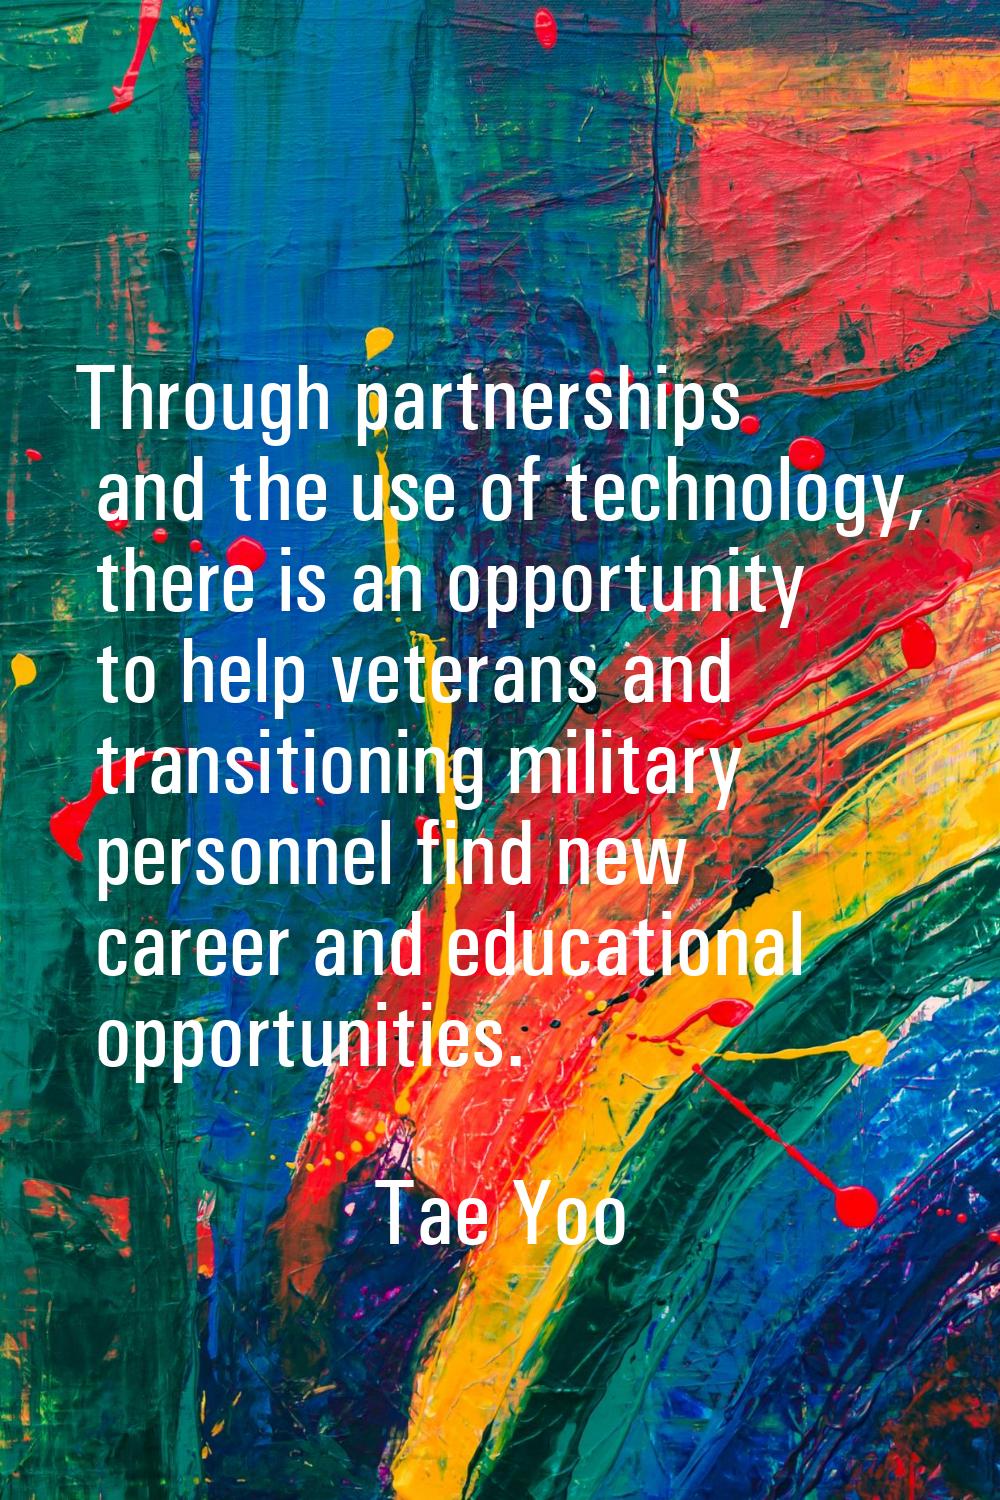 Through partnerships and the use of technology, there is an opportunity to help veterans and transi